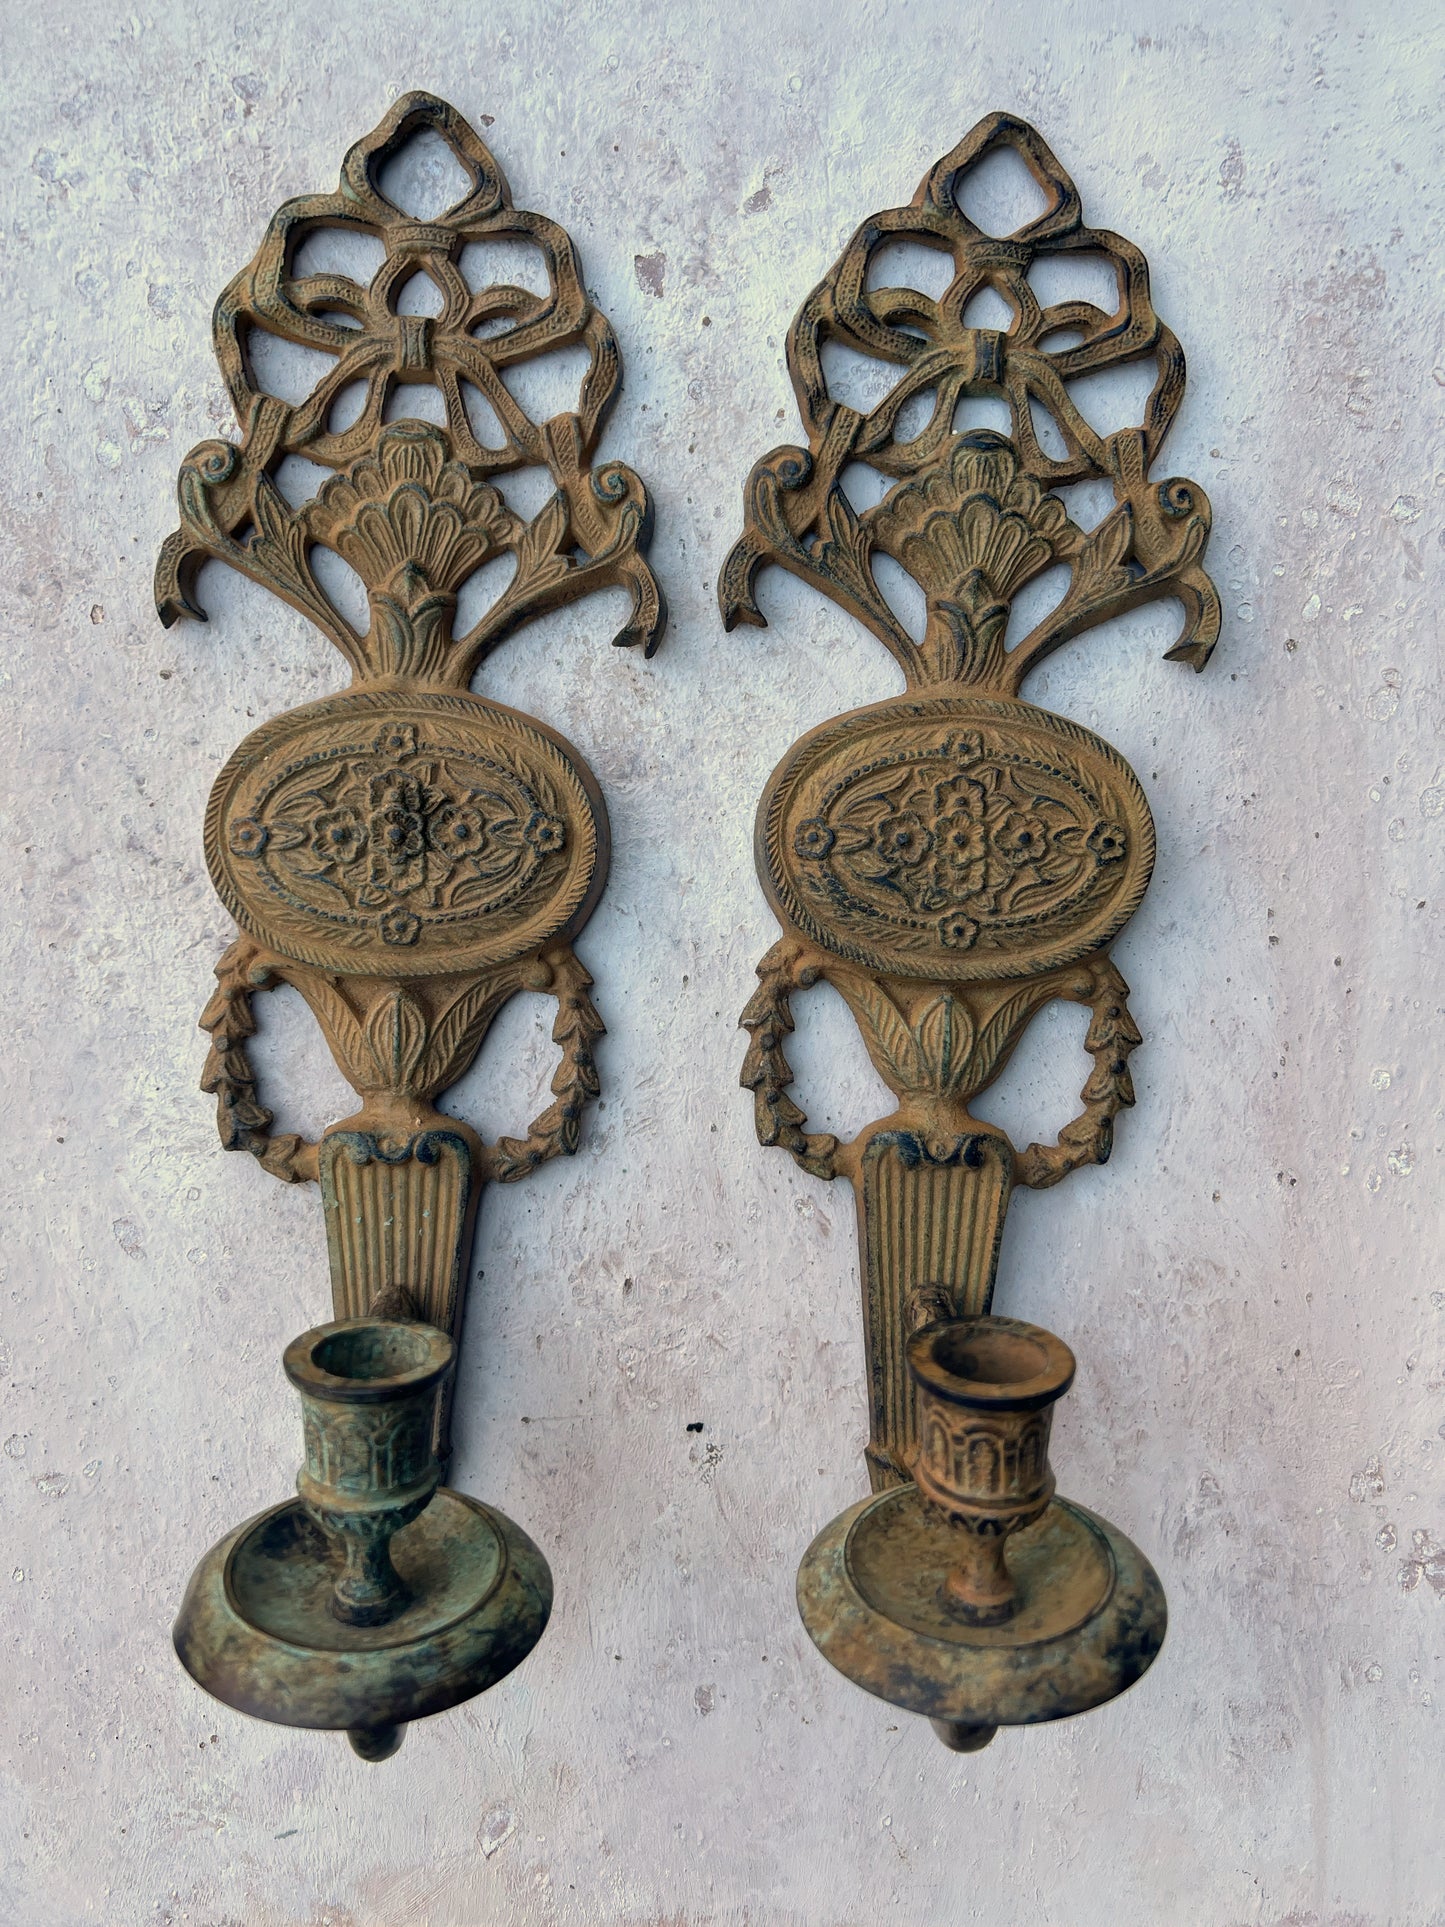 Rococo Style Candle Wall Sconces, Pair